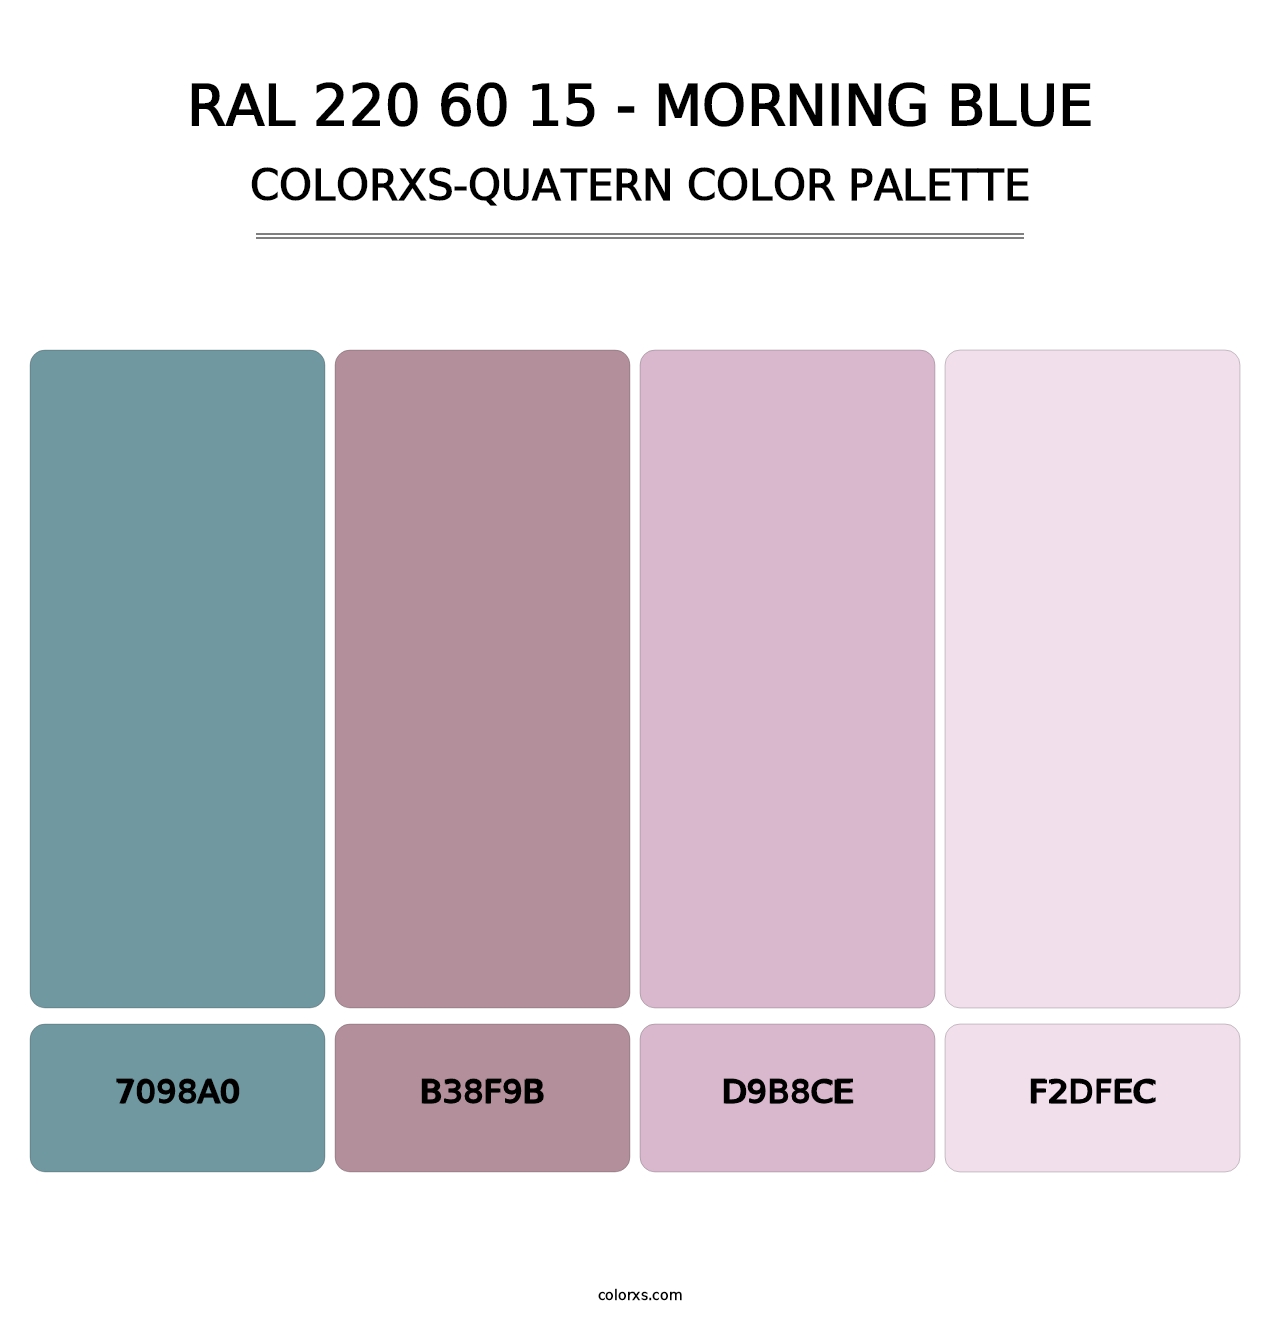 RAL 220 60 15 - Morning Blue - Colorxs Quatern Palette